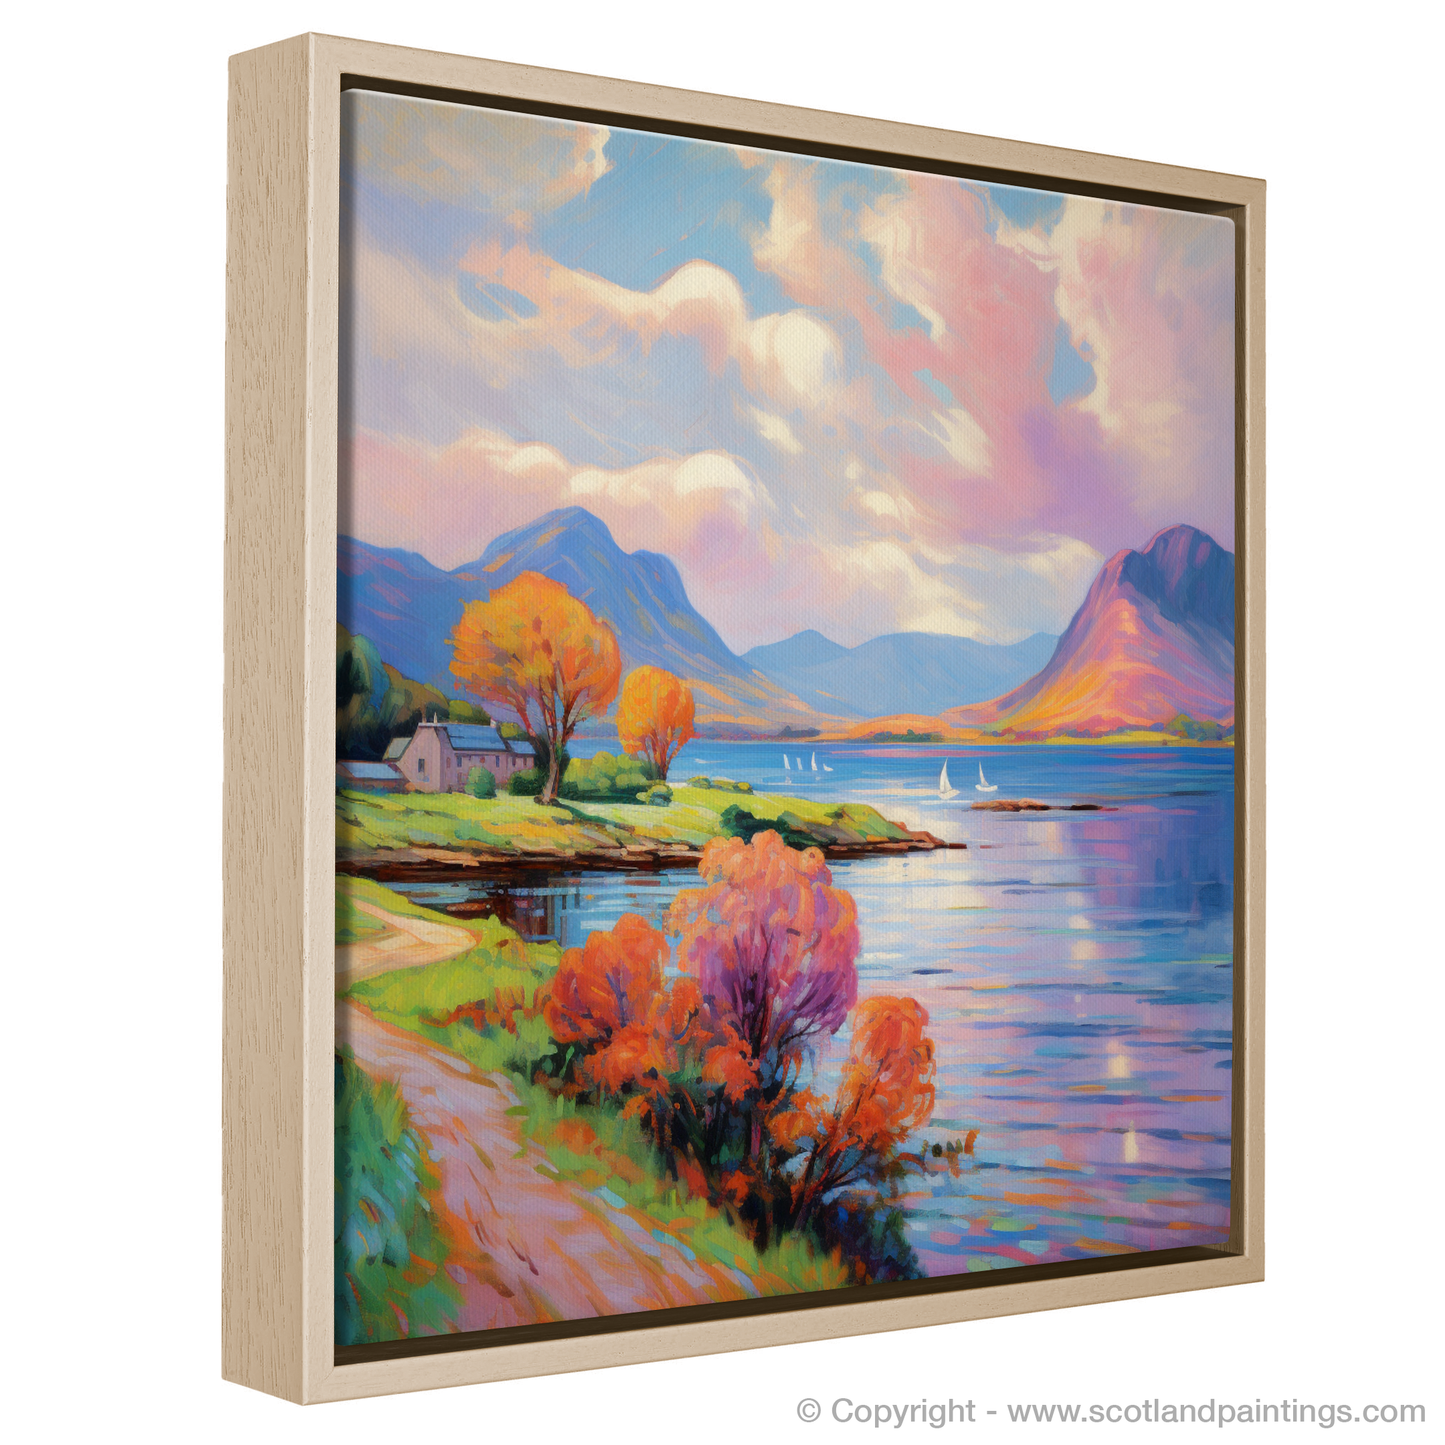 Painting and Art Print of Loch Leven, Highlands in summer entitled "Highland Summer Serenade at Loch Leven".